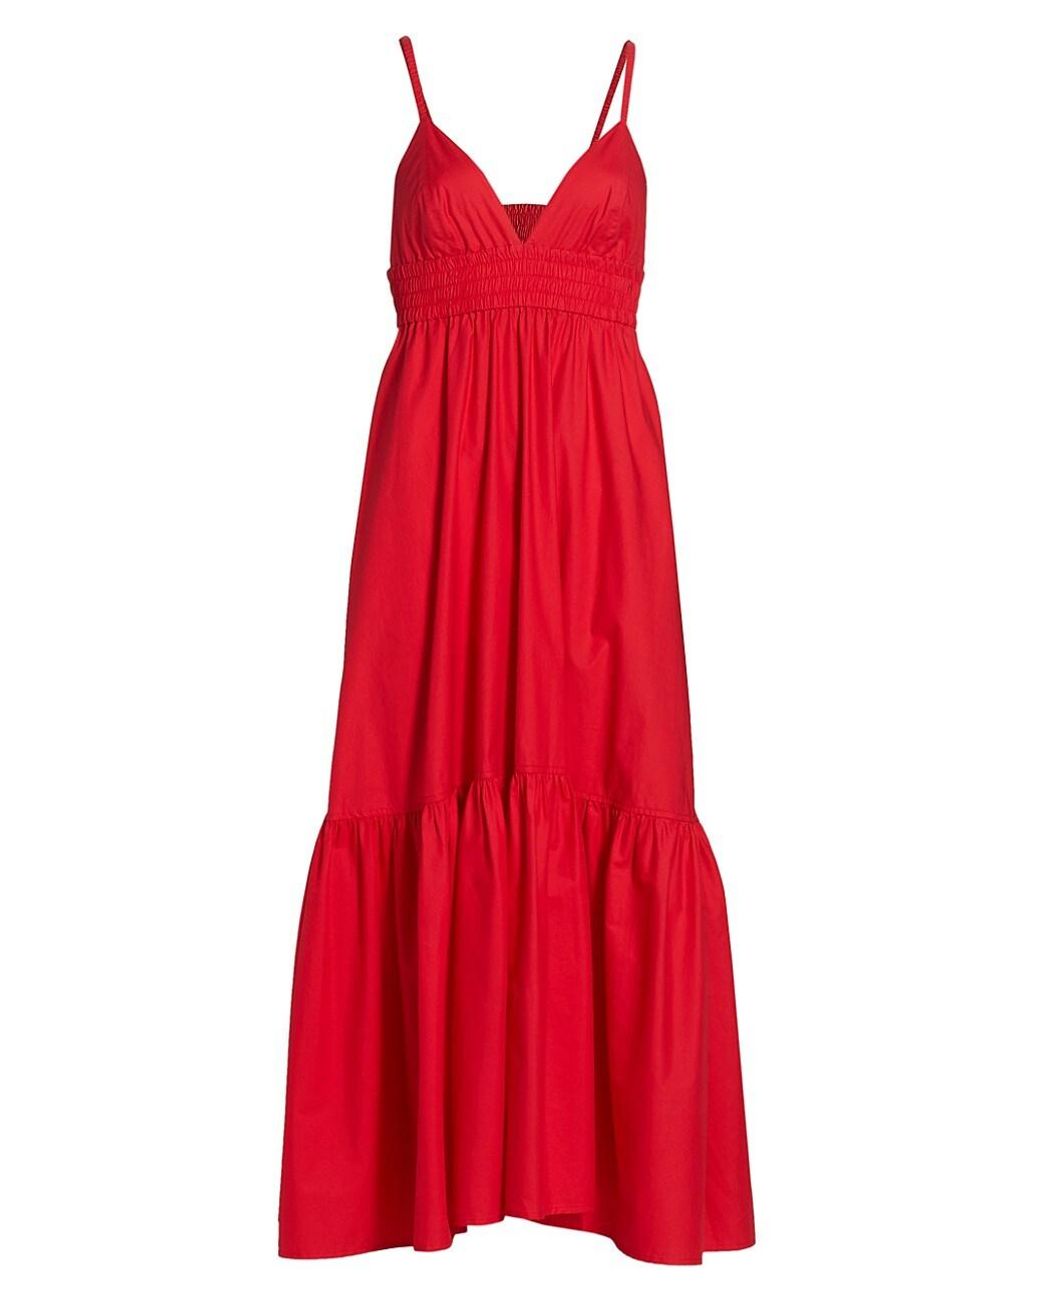 A.L.C. Cotton A.l.c. Rhodes Maxi Dress in Deep Red (Red) - Lyst